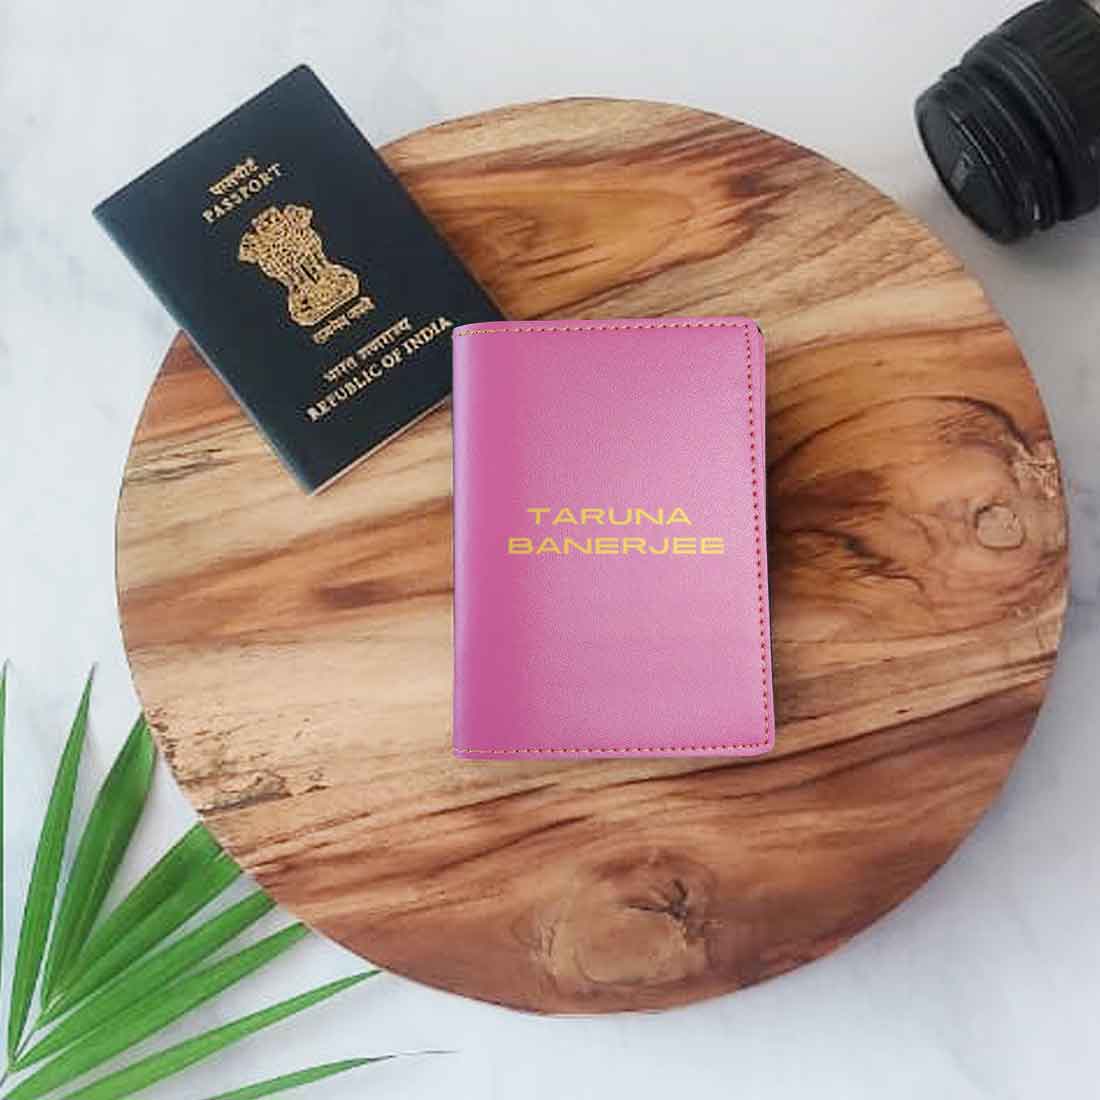 Leather Customised Passport Case Holder - Add name